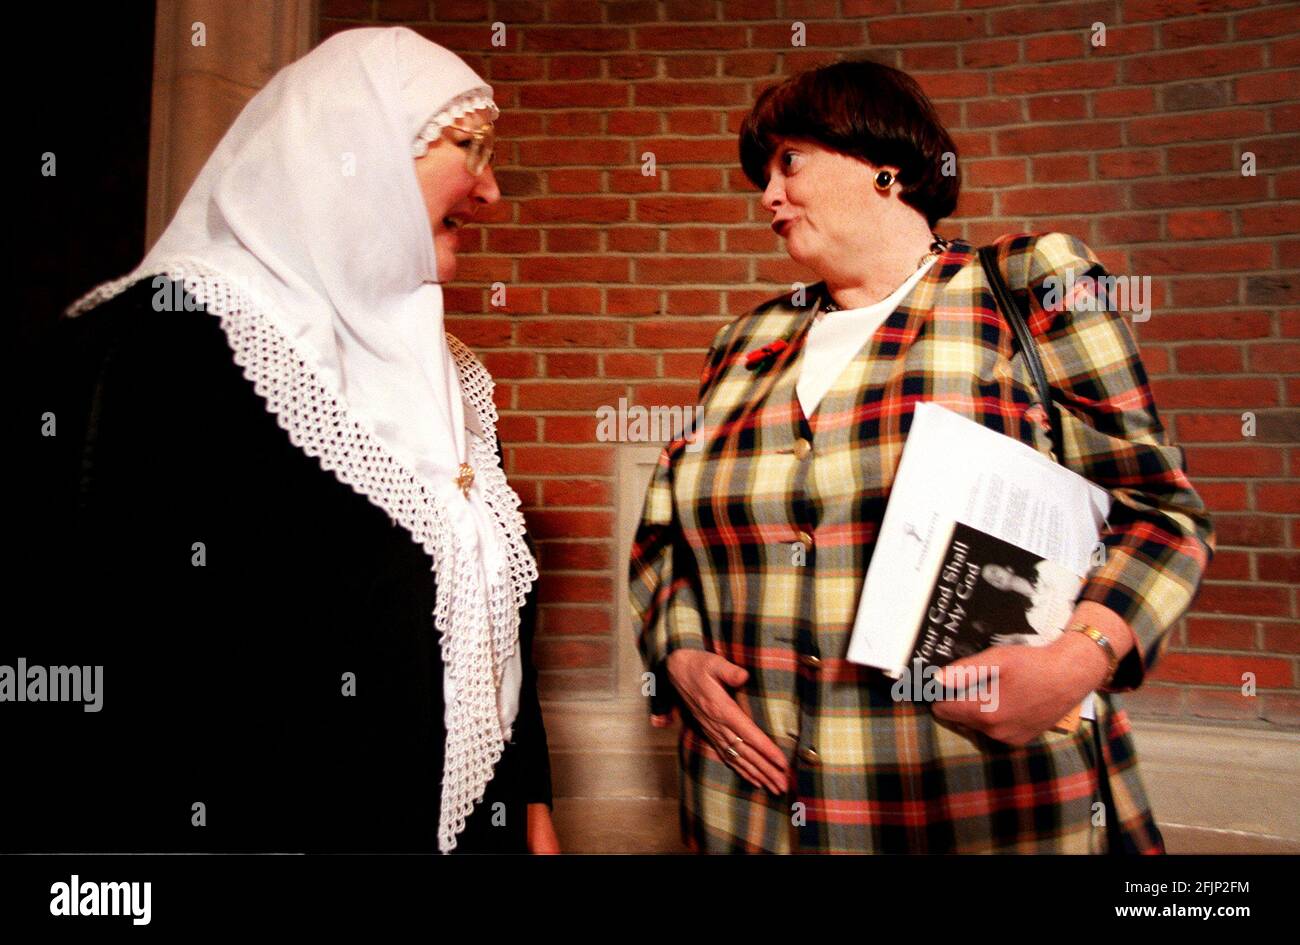 Ann Widdecombe shadow home secretary, Nov 2000who spoke at a consevative party policy forum with Britain's faith communities. Here speaking with Riqaiyyah Maqsood at the Emmanuelle center in Westminster. Stock Photo